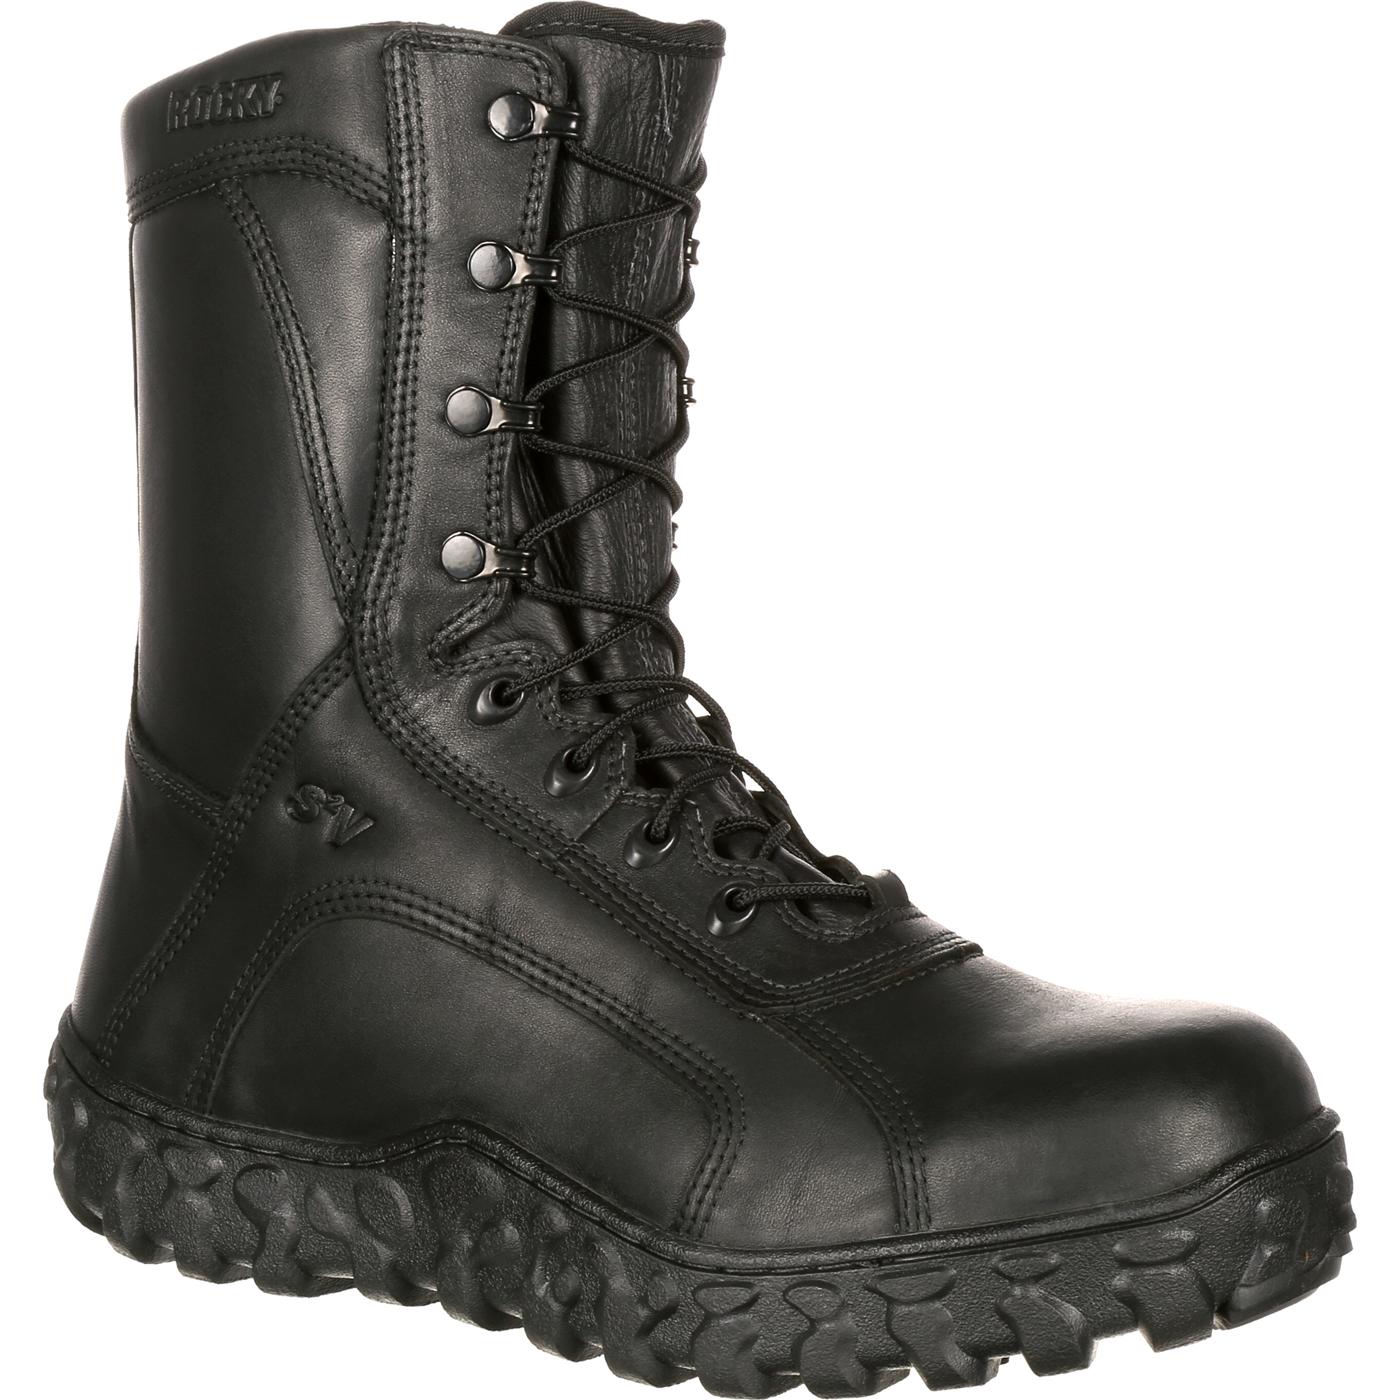 Rocky S2V: Steel Toe Tactical Military Boot, style RKC053